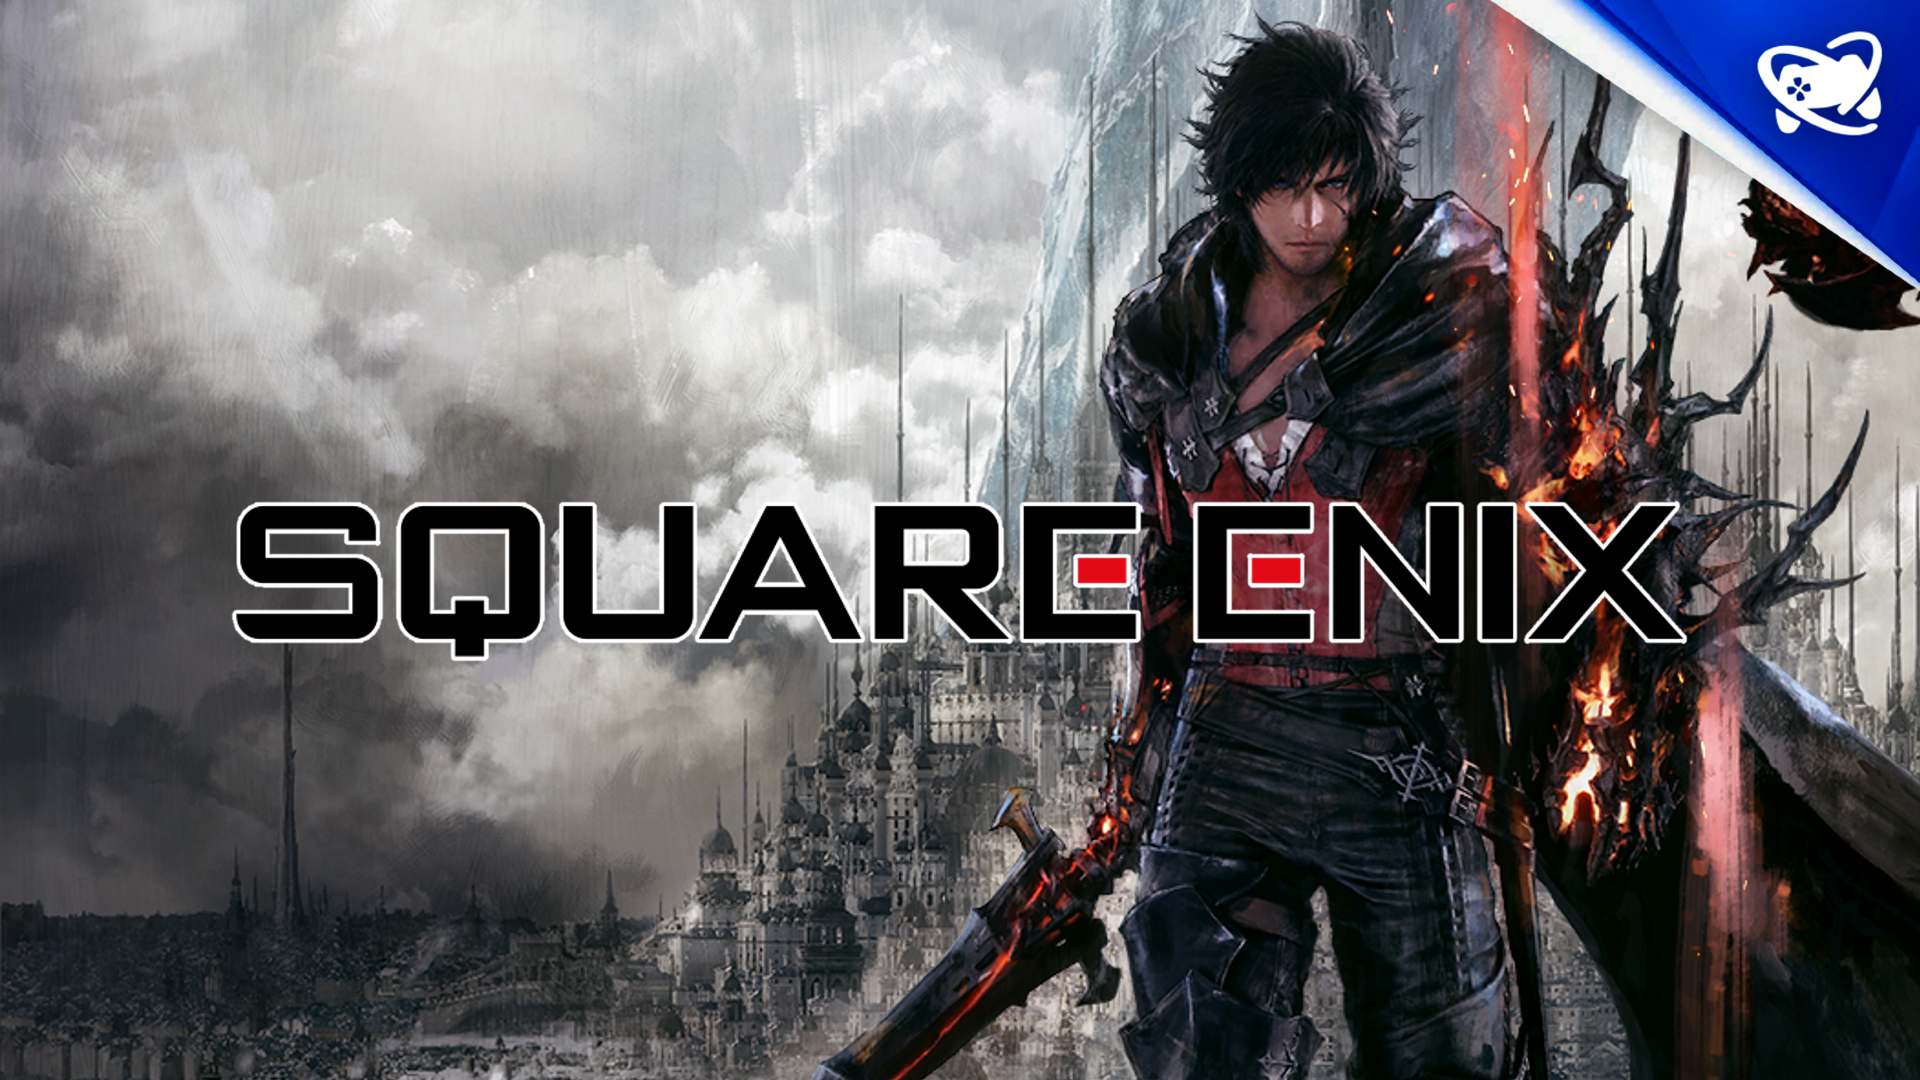 In 2019, Microsoft plans to buy Square Enix